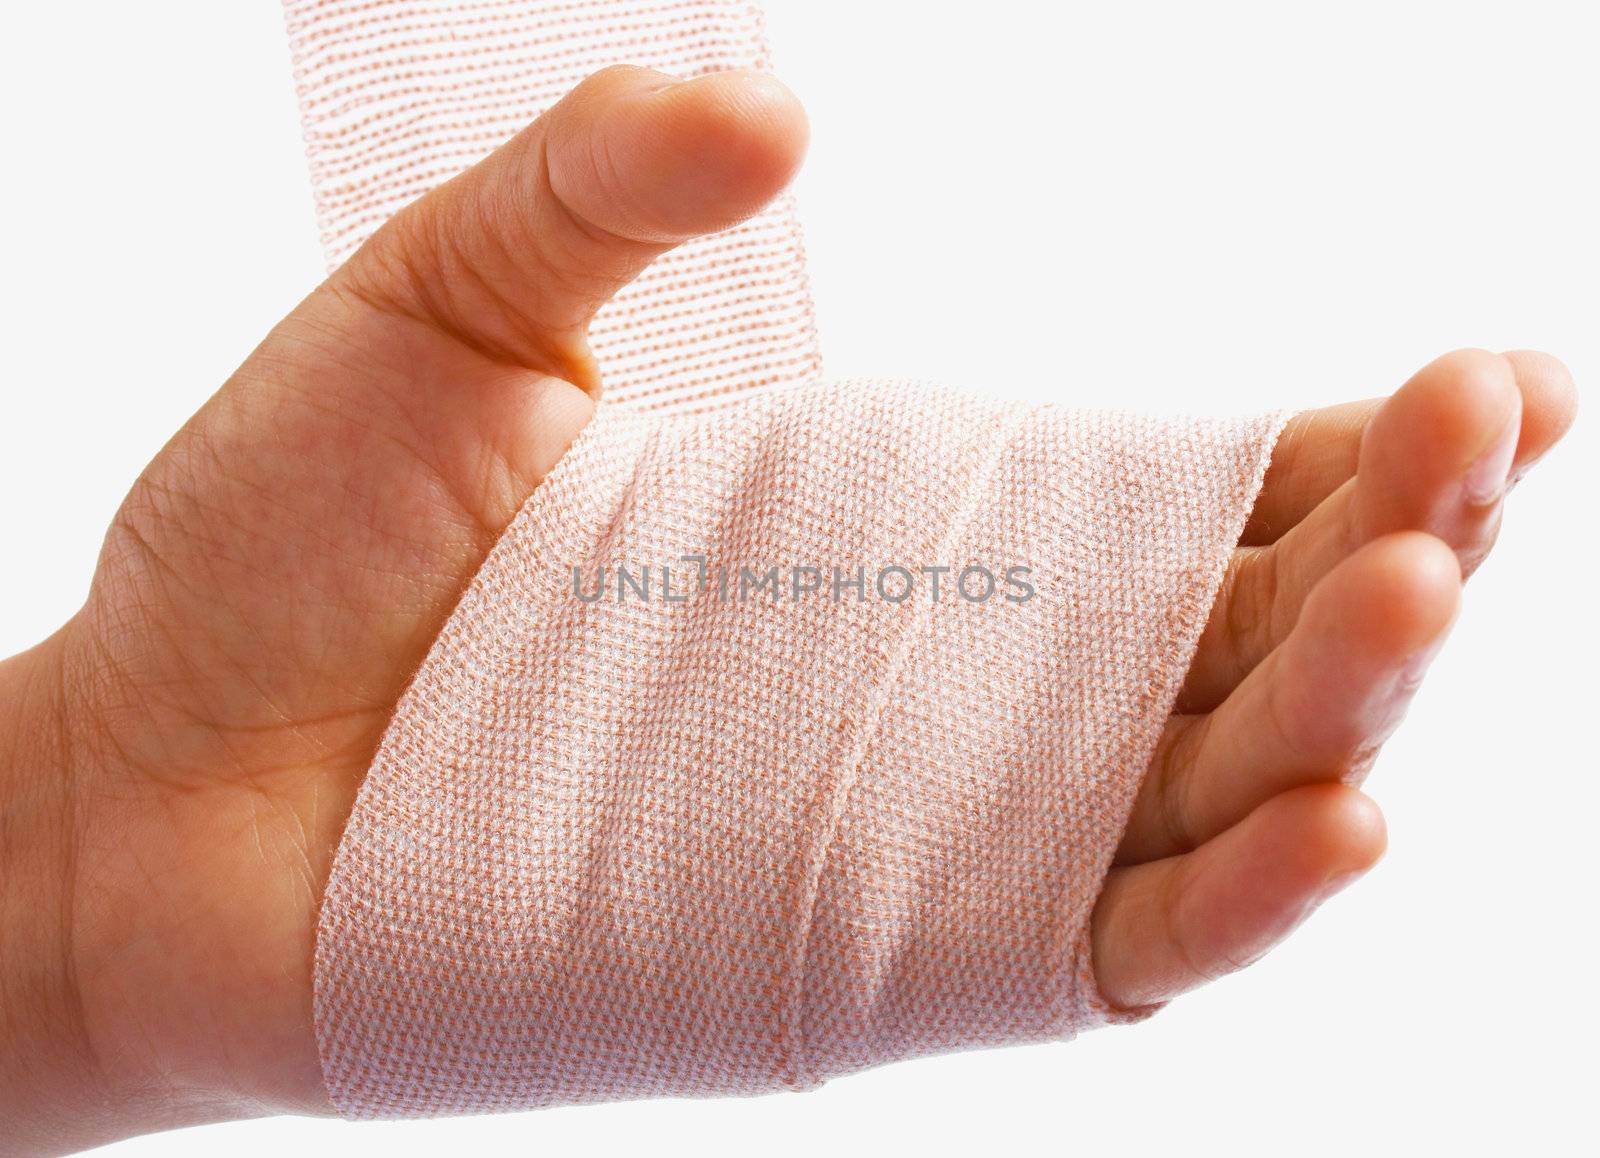 Hand Being Bandaged As Injury by stuartmiles